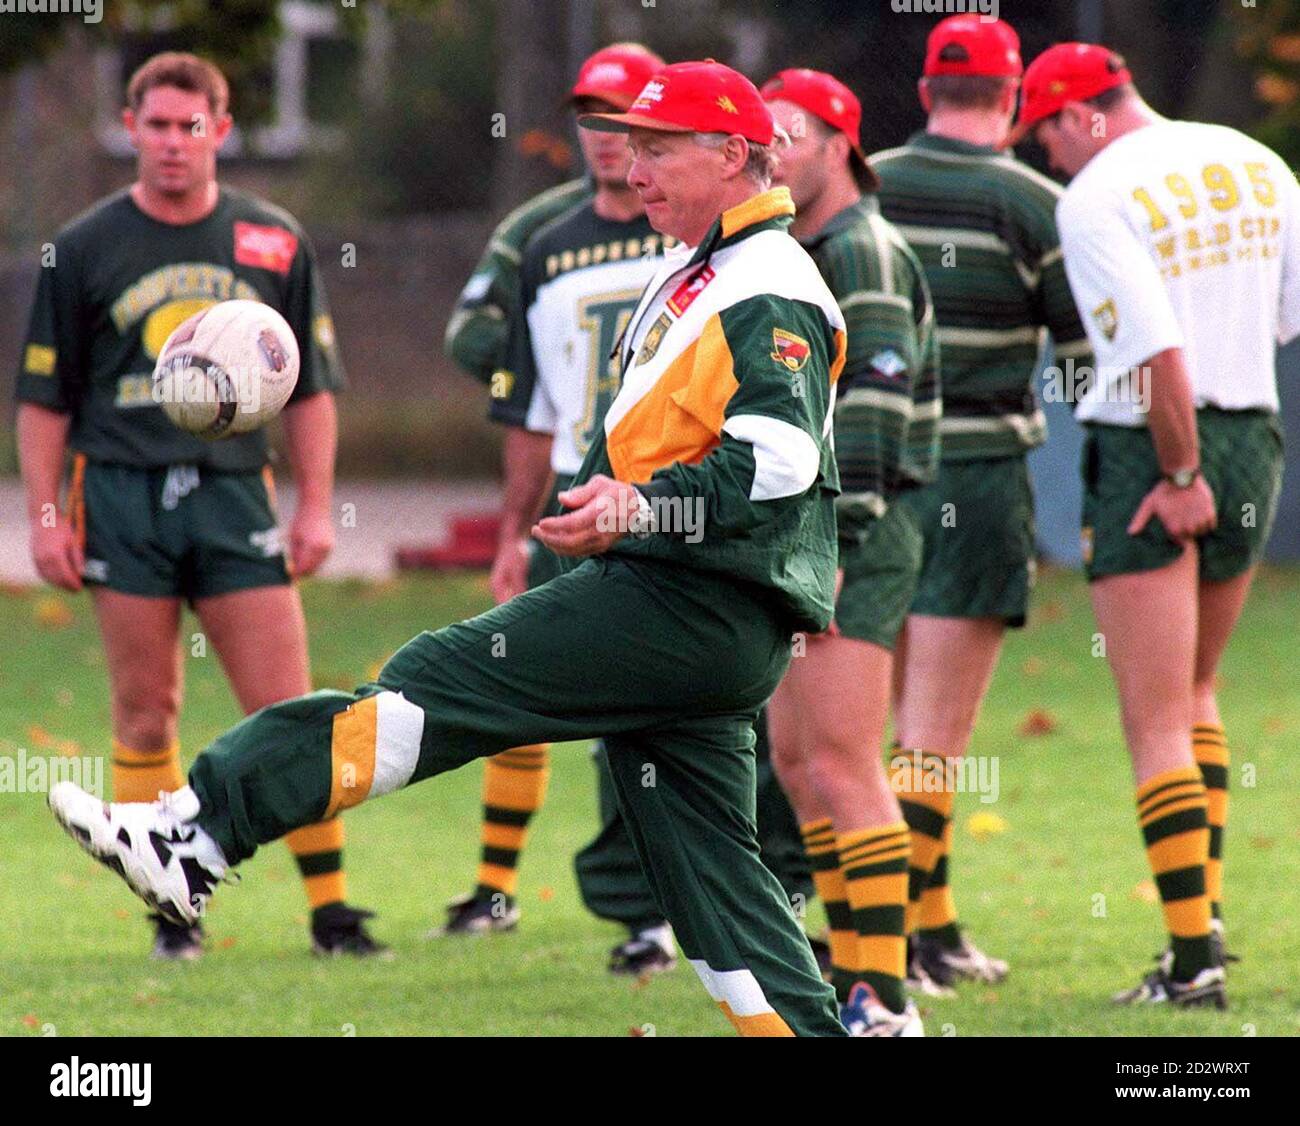 The Australian Rugby League Team Coach Bobby Fulton with his squad at training in Leeds today (Weds) after the announcement of an Inquiry into his alleged remarks to the director of referees